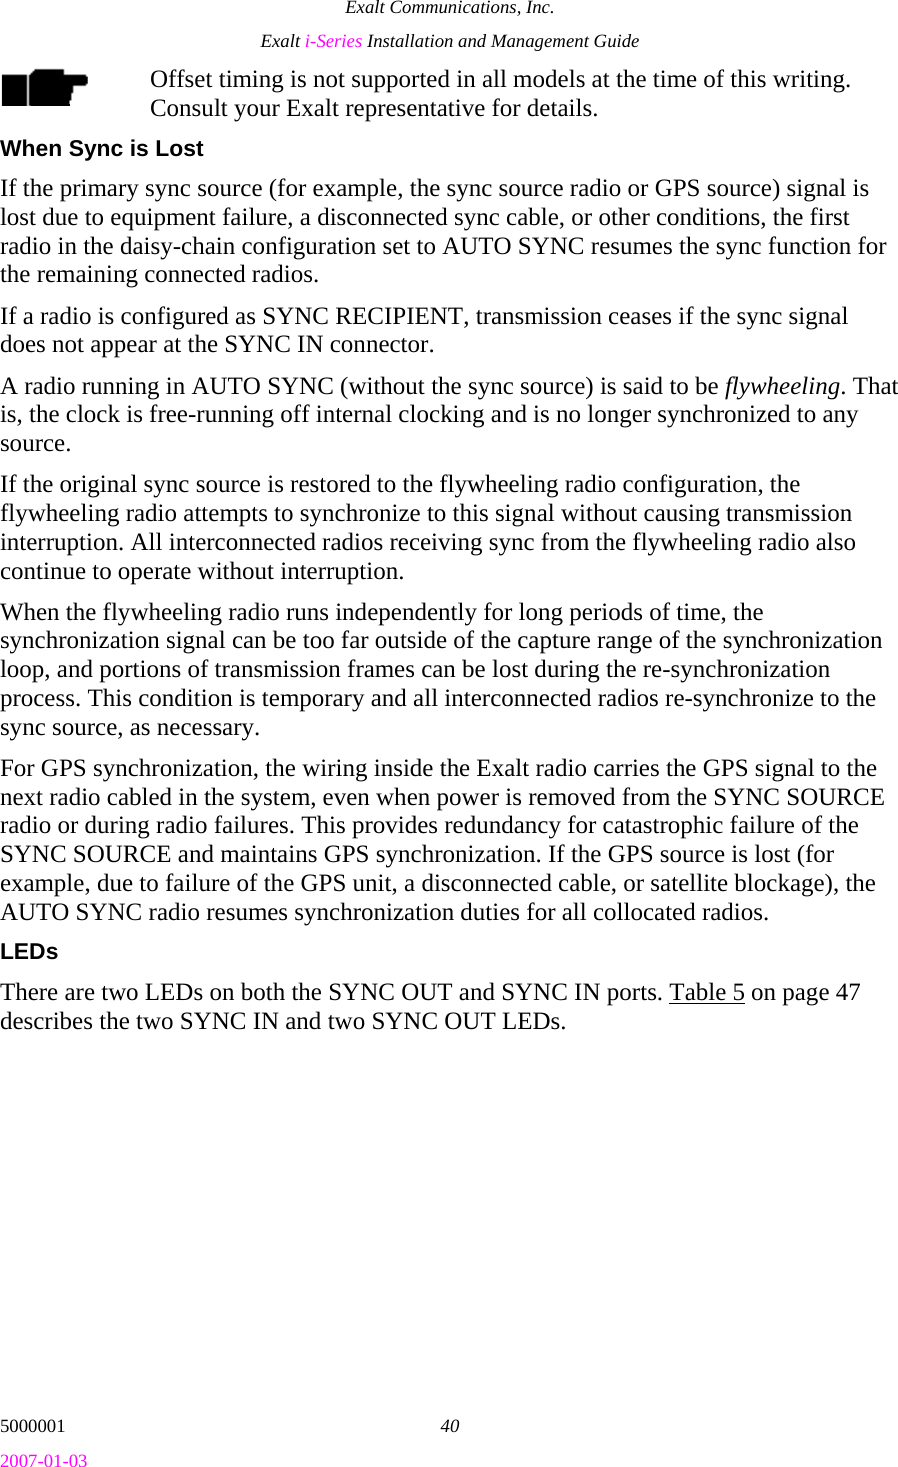 Exalt Communications, Inc. Exalt i-Series Installation and Management Guide 5000001  40 2007-01-03 Offset timing is not supported in all models at the time of this writing. Consult your Exalt representative for details. When Sync is Lost If the primary sync source (for example, the sync source radio or GPS source) signal is lost due to equipment failure, a disconnected sync cable, or other conditions, the first radio in the daisy-chain configuration set to AUTO SYNC resumes the sync function for the remaining connected radios. If a radio is configured as SYNC RECIPIENT, transmission ceases if the sync signal does not appear at the SYNC IN connector. A radio running in AUTO SYNC (without the sync source) is said to be flywheeling. That is, the clock is free-running off internal clocking and is no longer synchronized to any source. If the original sync source is restored to the flywheeling radio configuration, the flywheeling radio attempts to synchronize to this signal without causing transmission interruption. All interconnected radios receiving sync from the flywheeling radio also continue to operate without interruption.  When the flywheeling radio runs independently for long periods of time, the synchronization signal can be too far outside of the capture range of the synchronization loop, and portions of transmission frames can be lost during the re-synchronization process. This condition is temporary and all interconnected radios re-synchronize to the sync source, as necessary. For GPS synchronization, the wiring inside the Exalt radio carries the GPS signal to the next radio cabled in the system, even when power is removed from the SYNC SOURCE radio or during radio failures. This provides redundancy for catastrophic failure of the SYNC SOURCE and maintains GPS synchronization. If the GPS source is lost (for example, due to failure of the GPS unit, a disconnected cable, or satellite blockage), the AUTO SYNC radio resumes synchronization duties for all collocated radios. LEDs There are two LEDs on both the SYNC OUT and SYNC IN ports. Table 5 on page 47 describes the two SYNC IN and two SYNC OUT LEDs. 